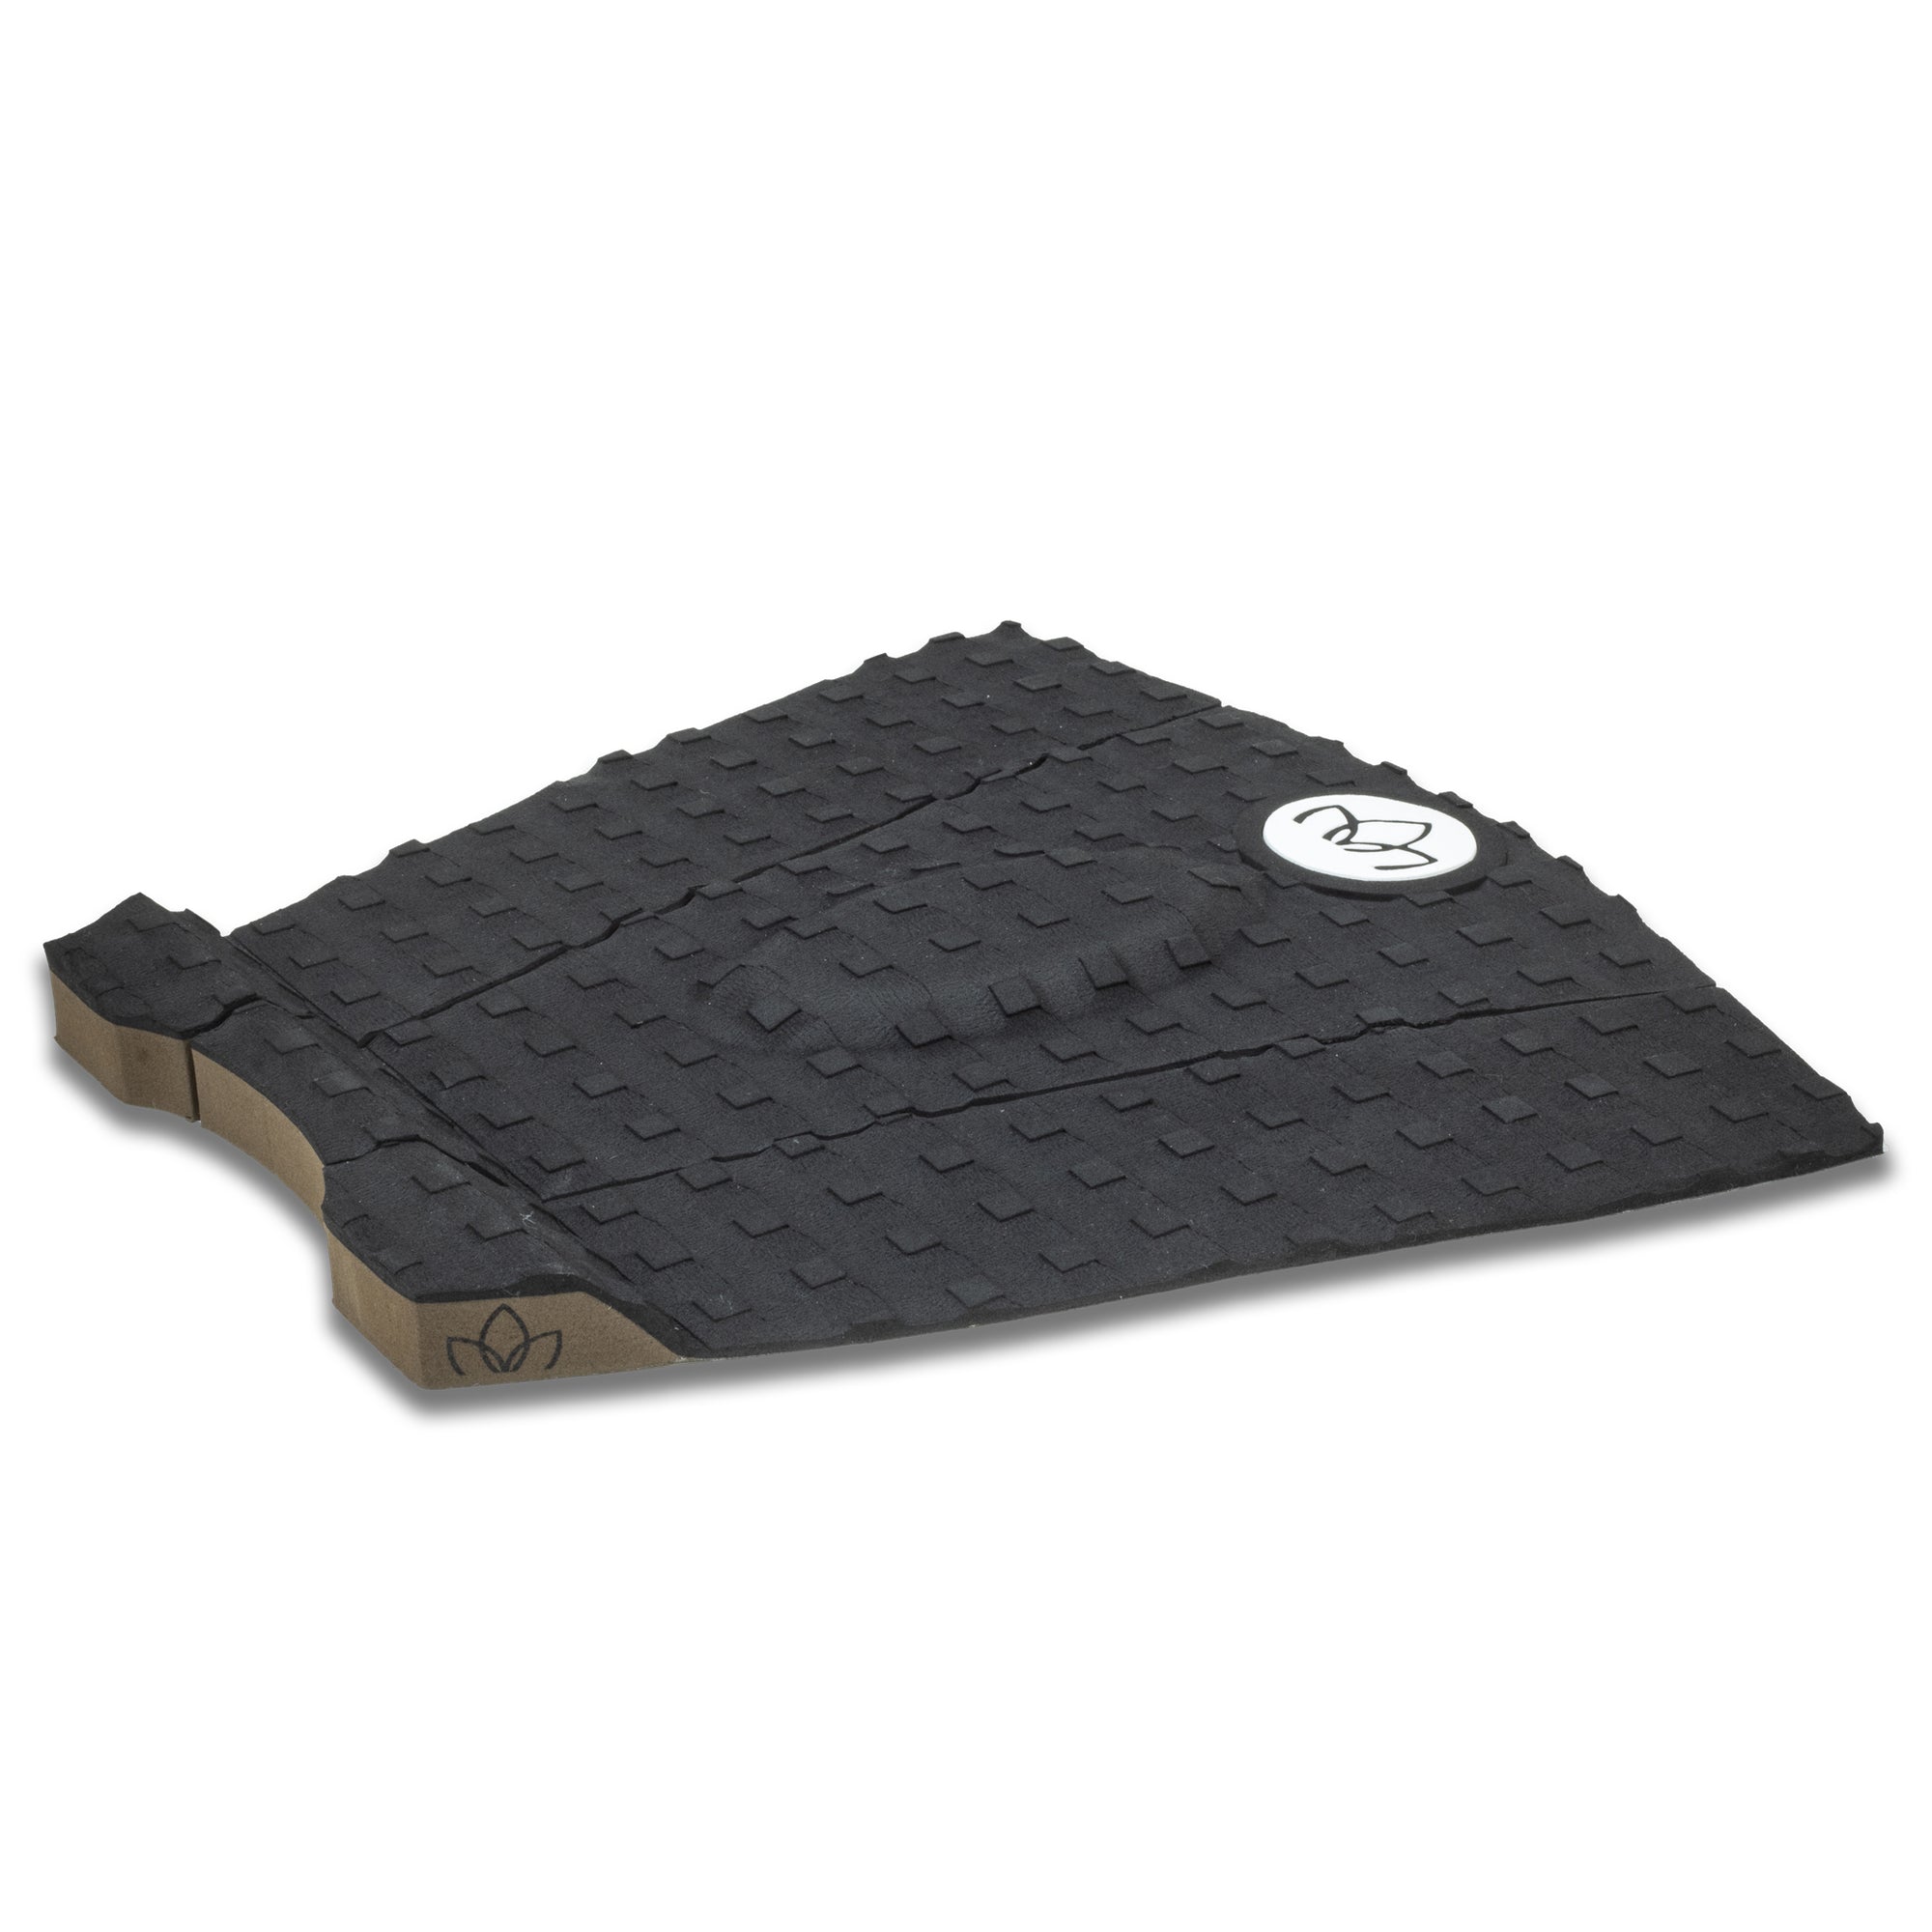 Fish 3 Piece Traction Pad – Stay Covered